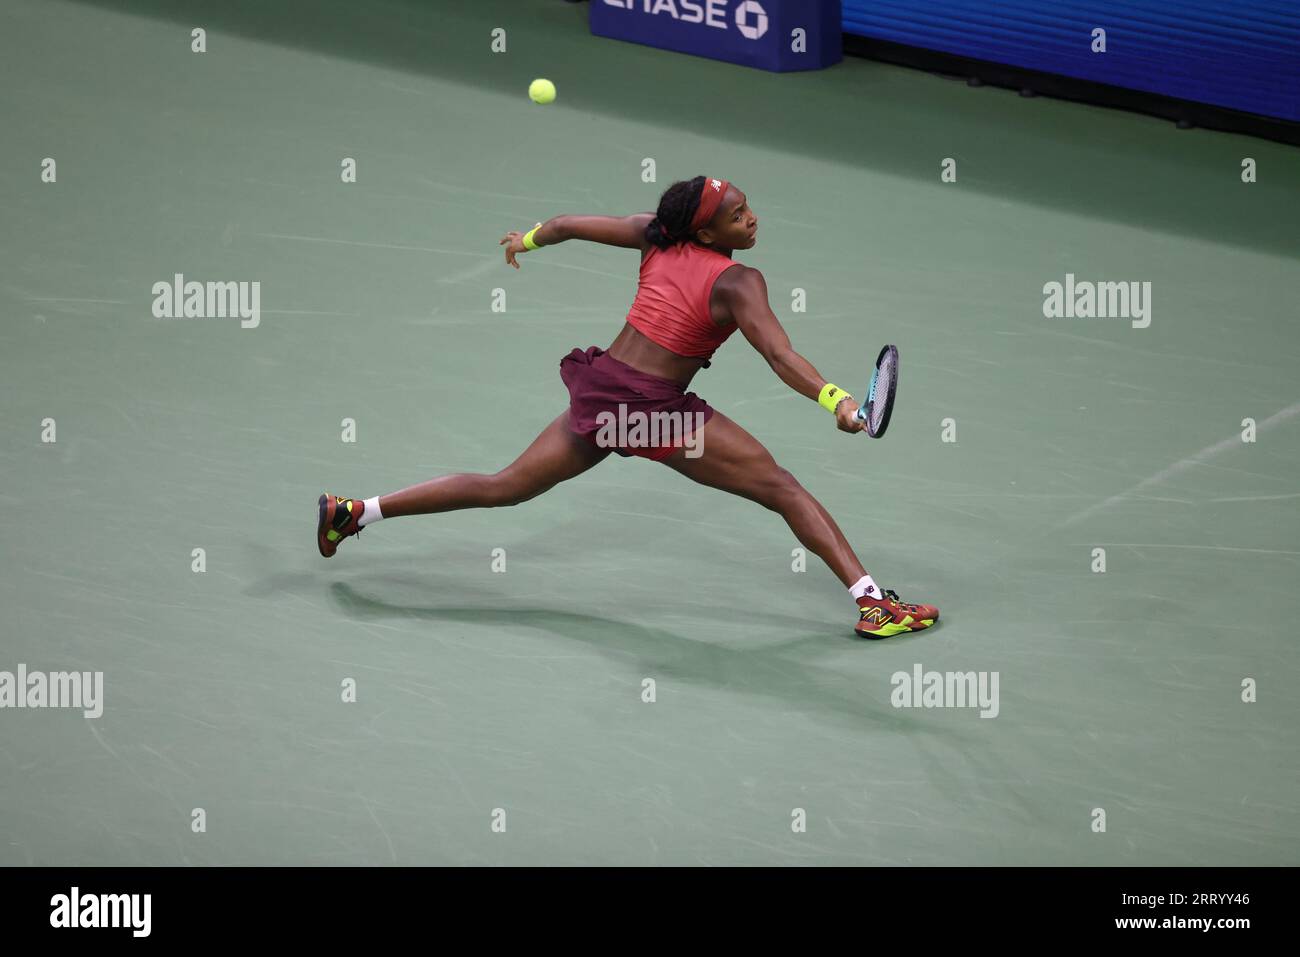 New York, United States. 09th Sep, 2023. Coco Gauff on her way to defeating Ayrna Sabalenka in the women's final to claim the US Open title and her first grand slam victory. Credit: Adam Stoltman/Alamy Live News Stock Photo